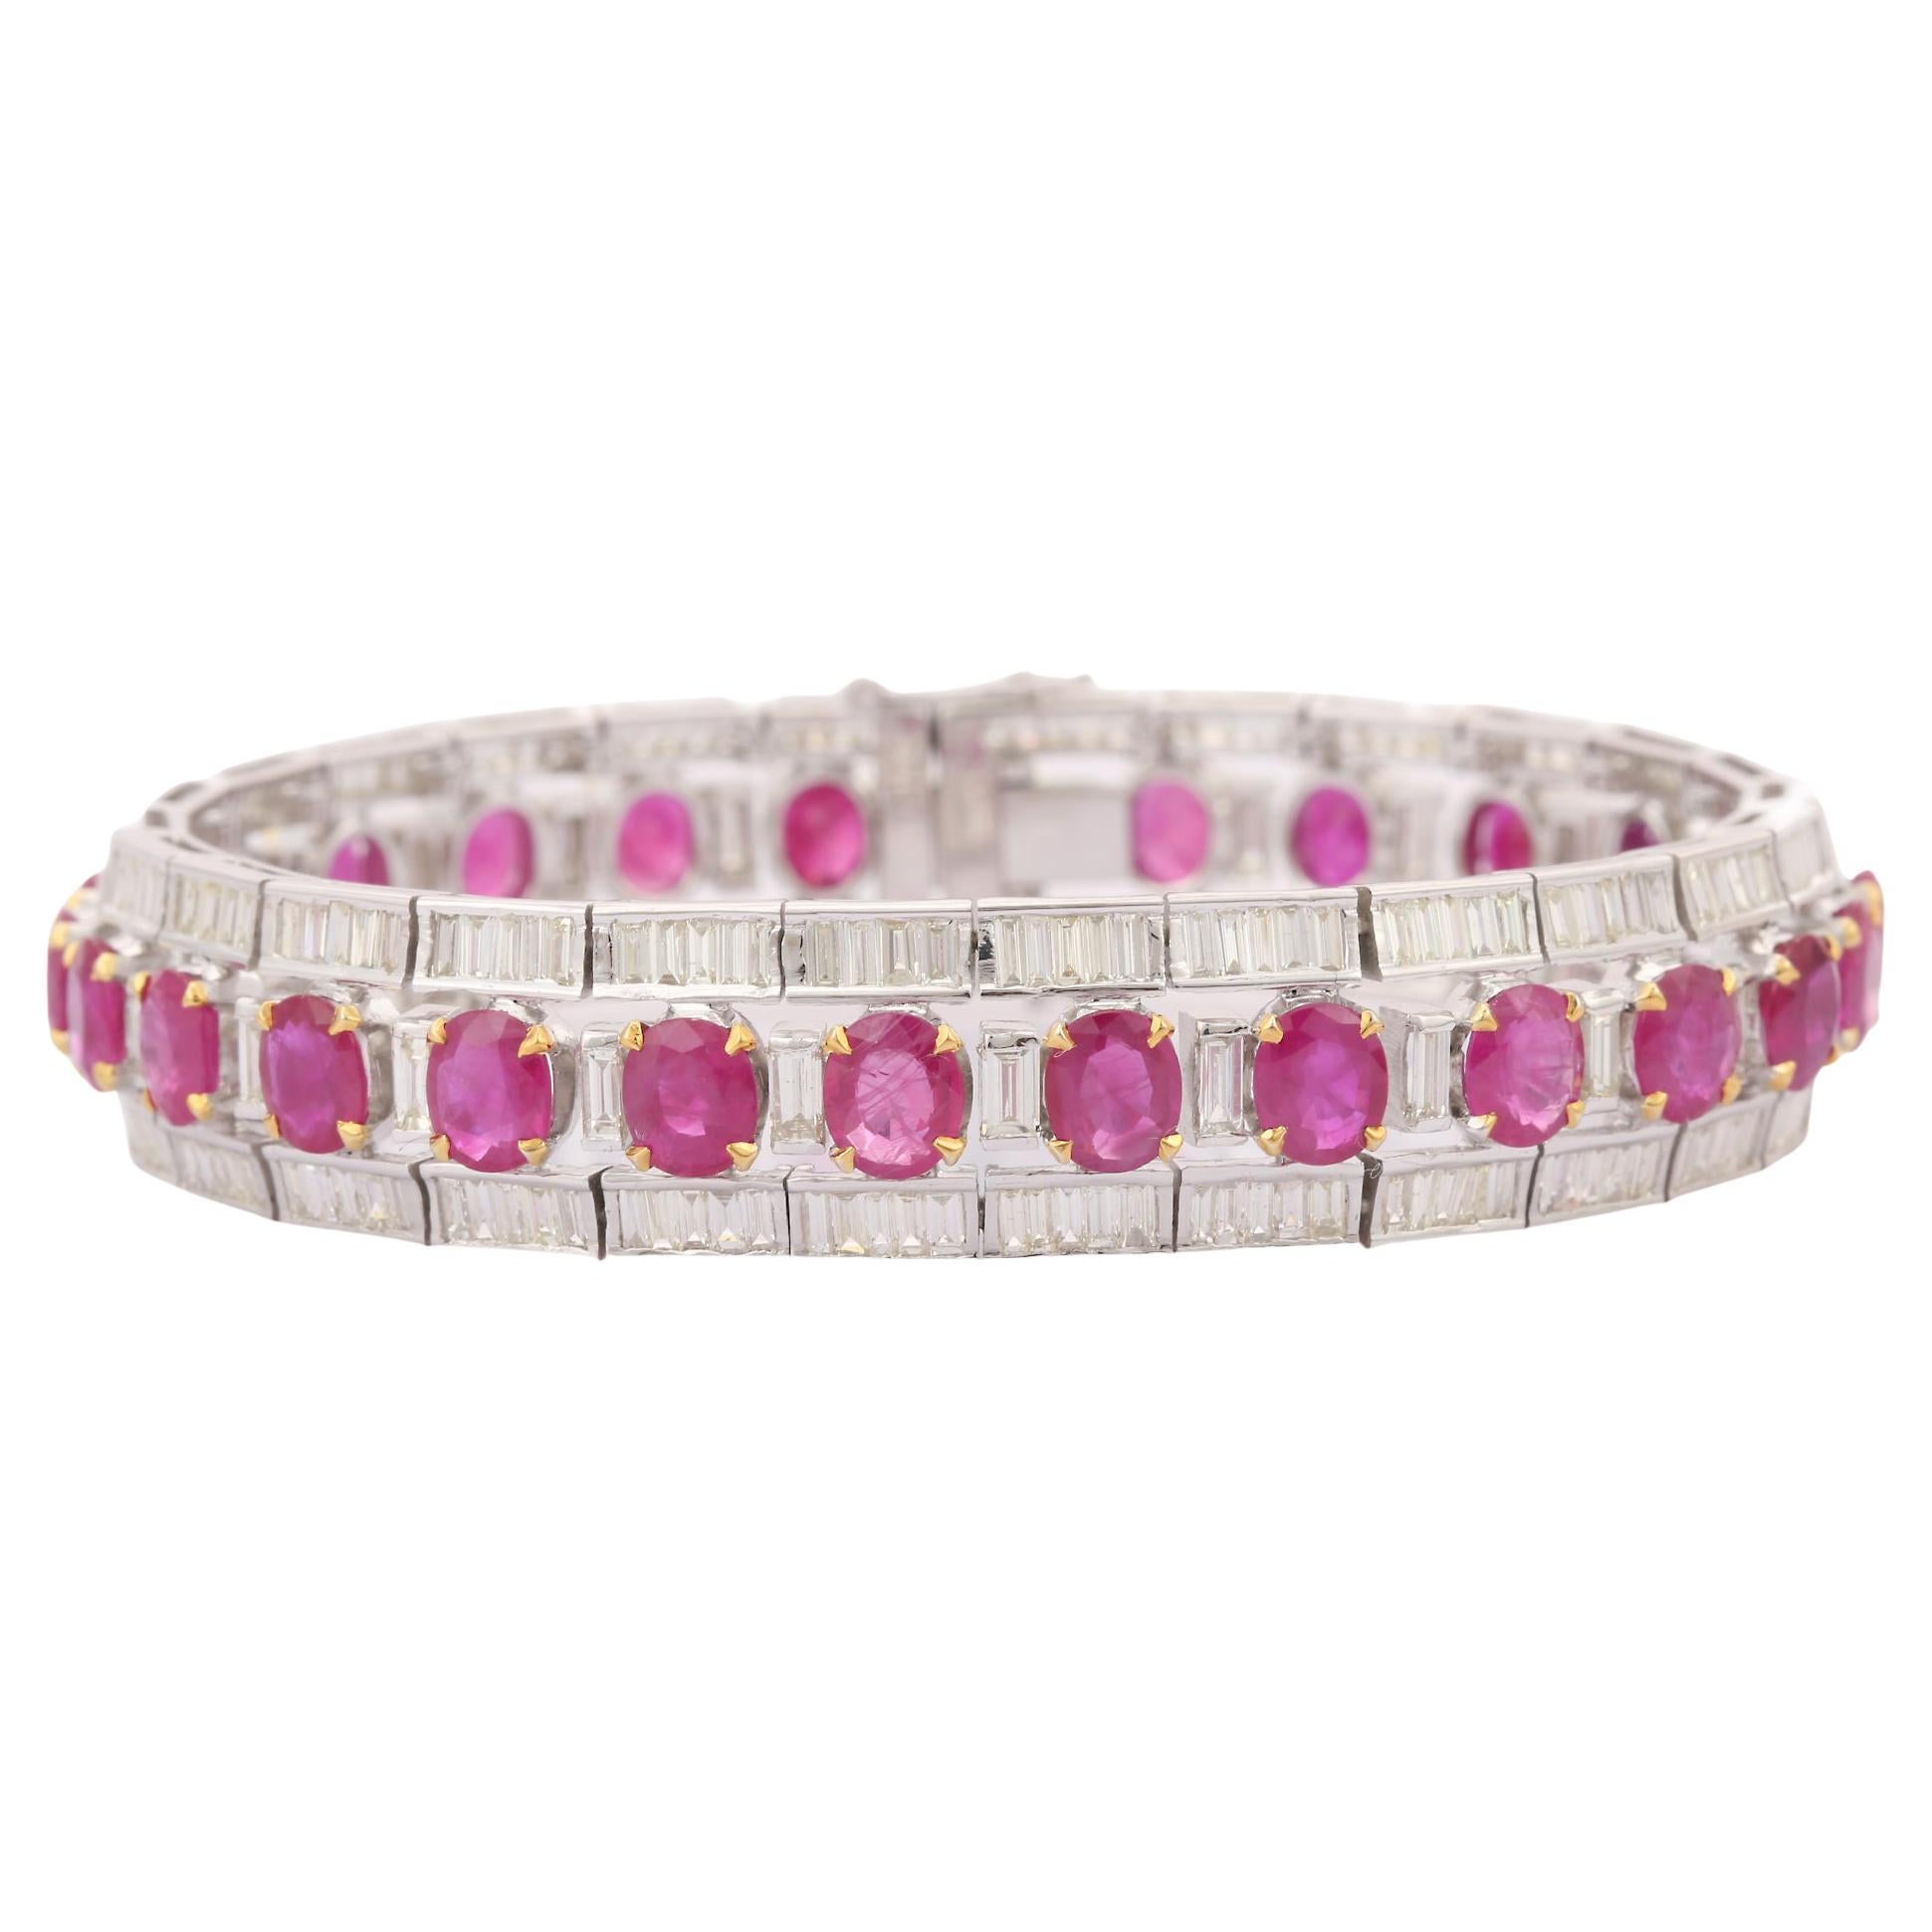 18kt Solid White Gold 8.5 CTW Diamond and 21 CTW Ruby Tennis Bracelet For Her